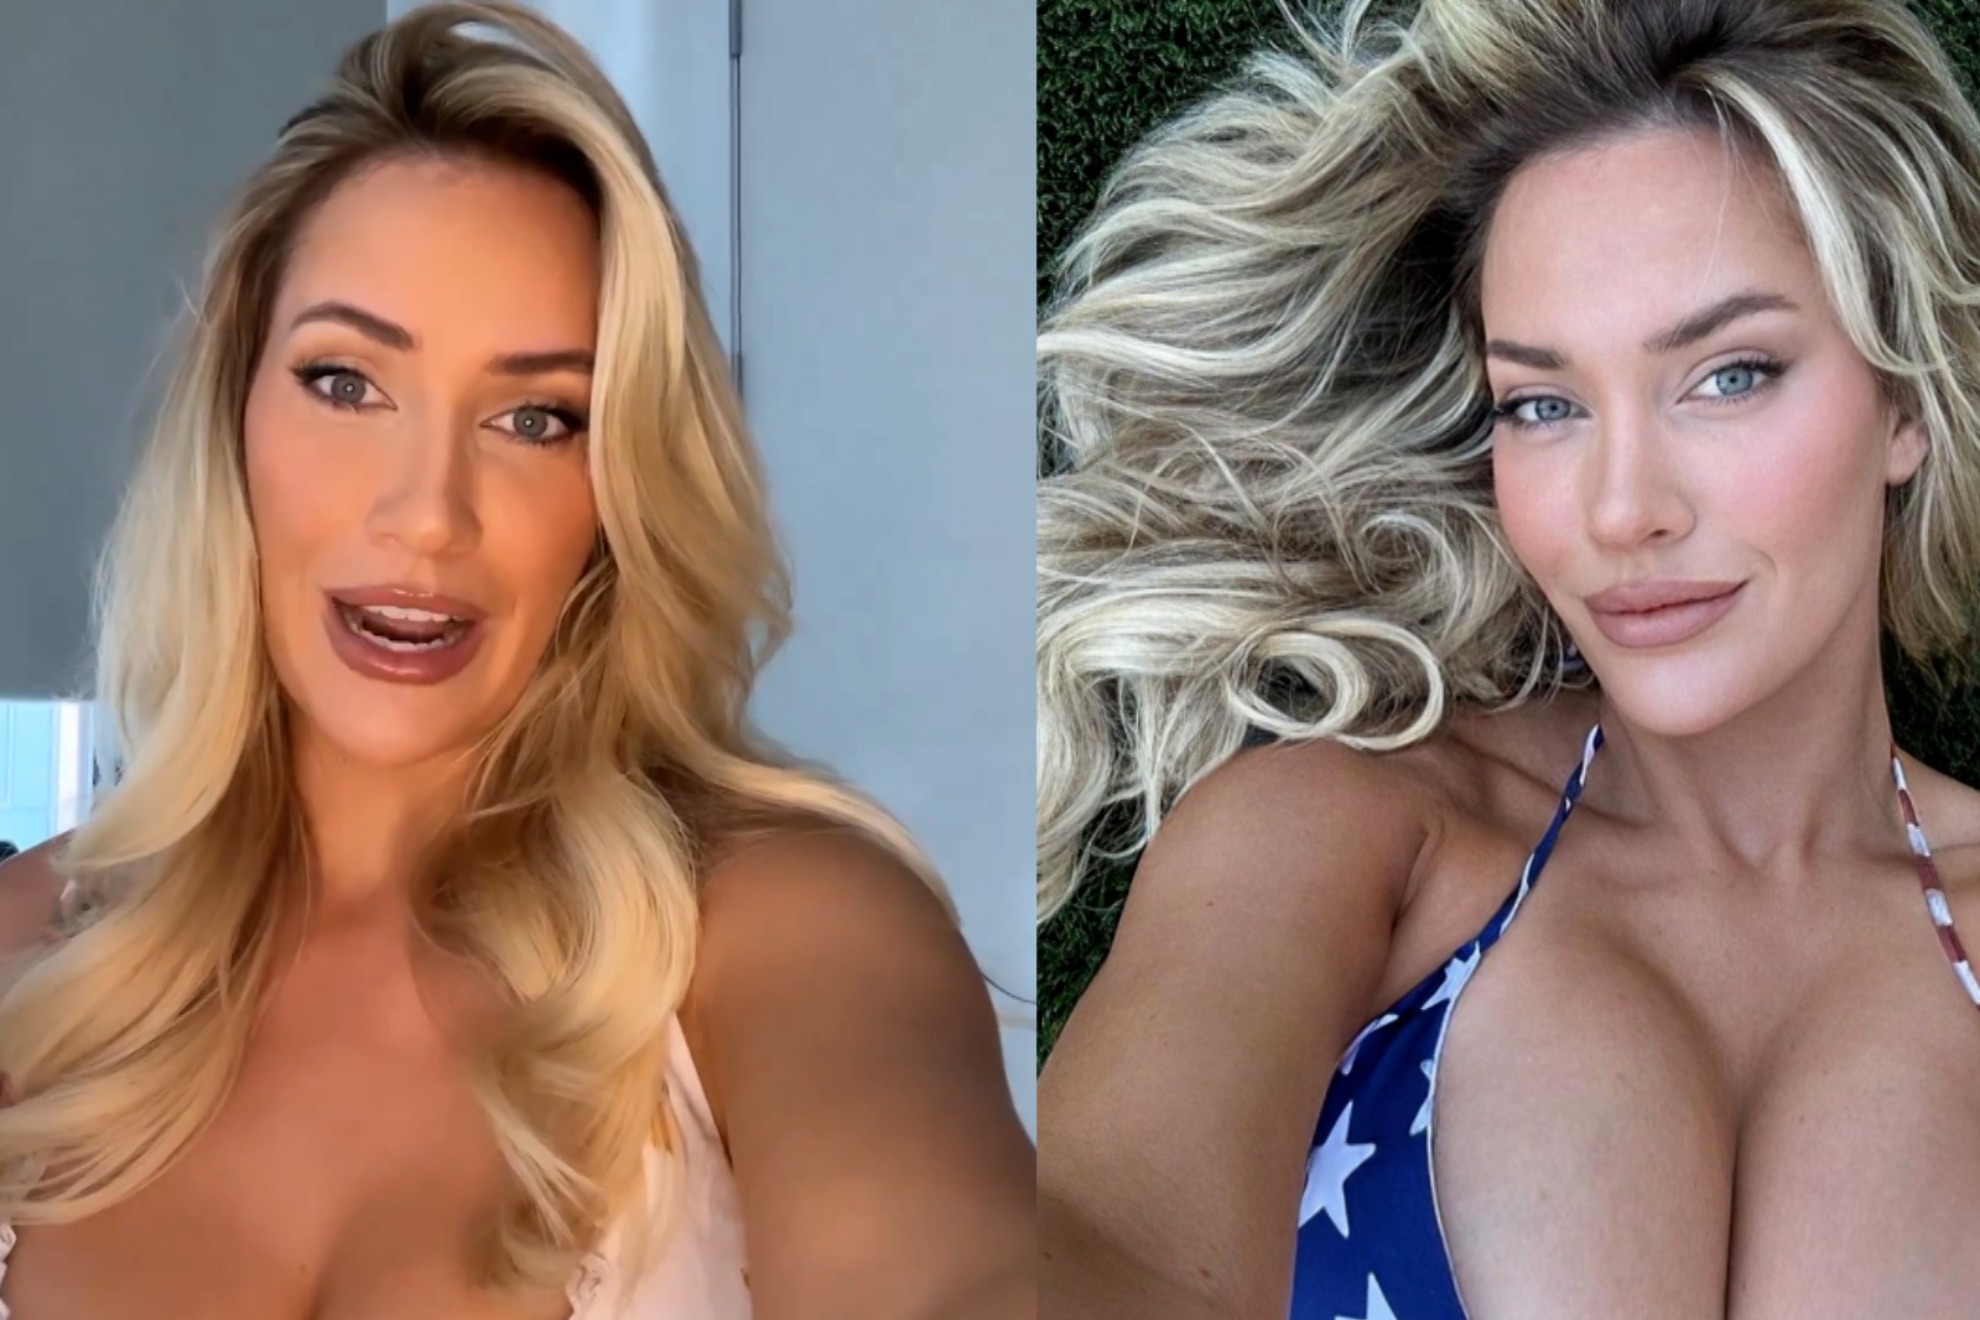 Paige Spiranac comes clean and explains why her breasts have